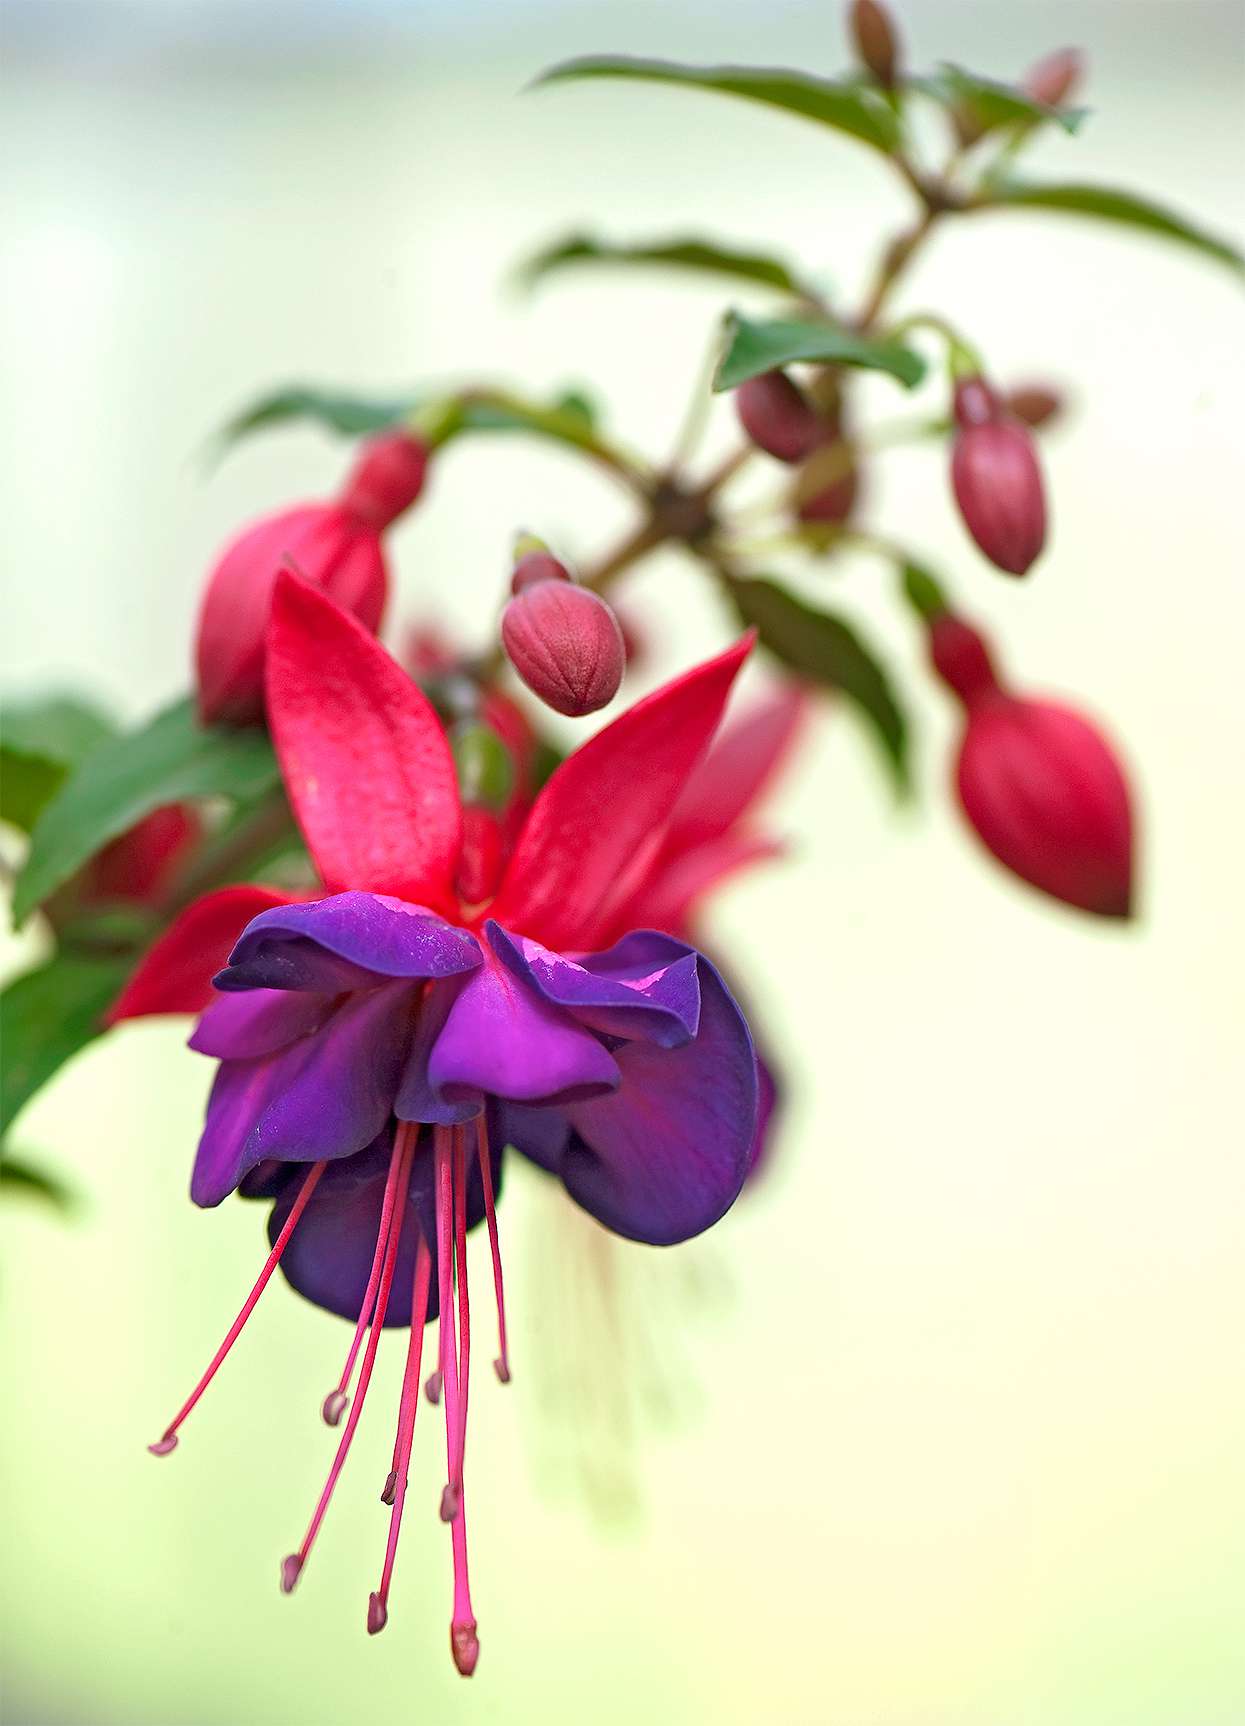 dynamic view of red and purple fuchsia bloom